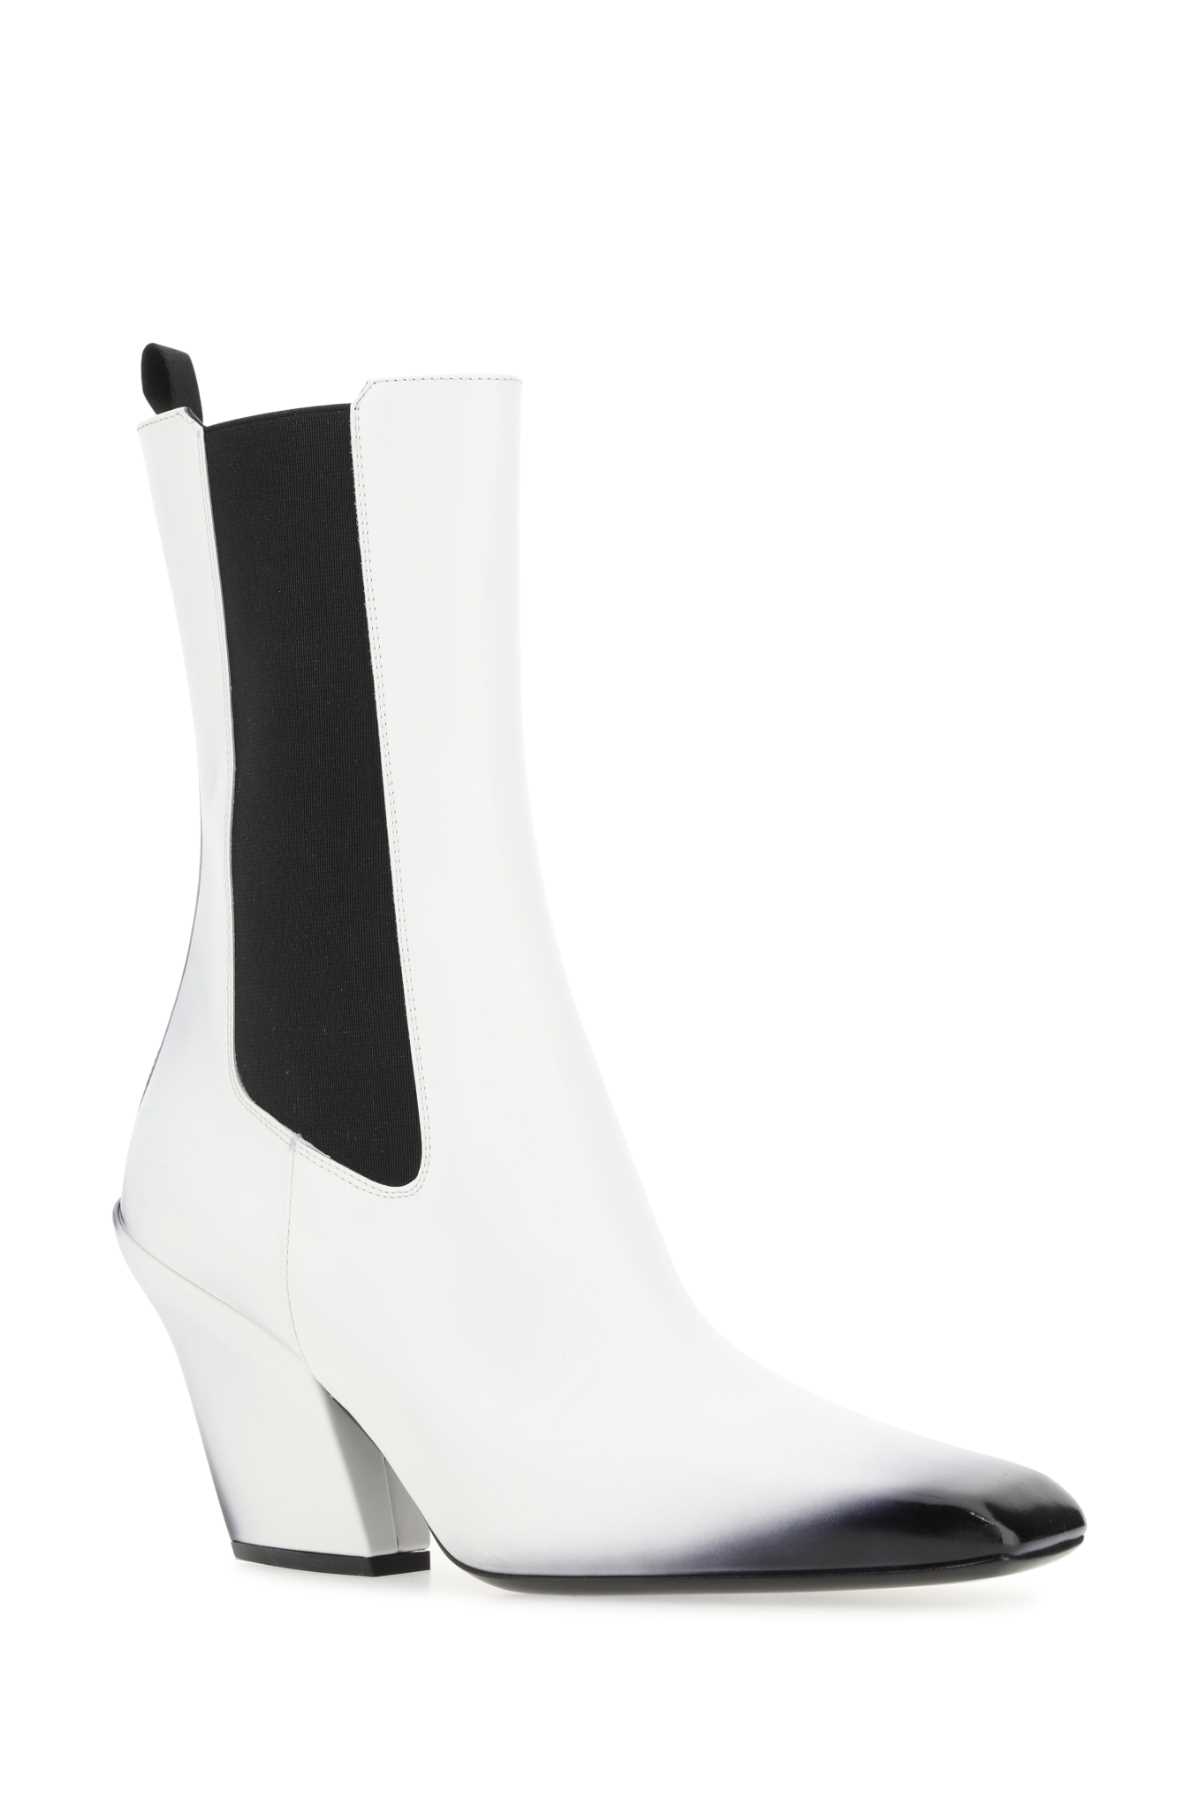 Prada White Leather Ankle Boots In F0009